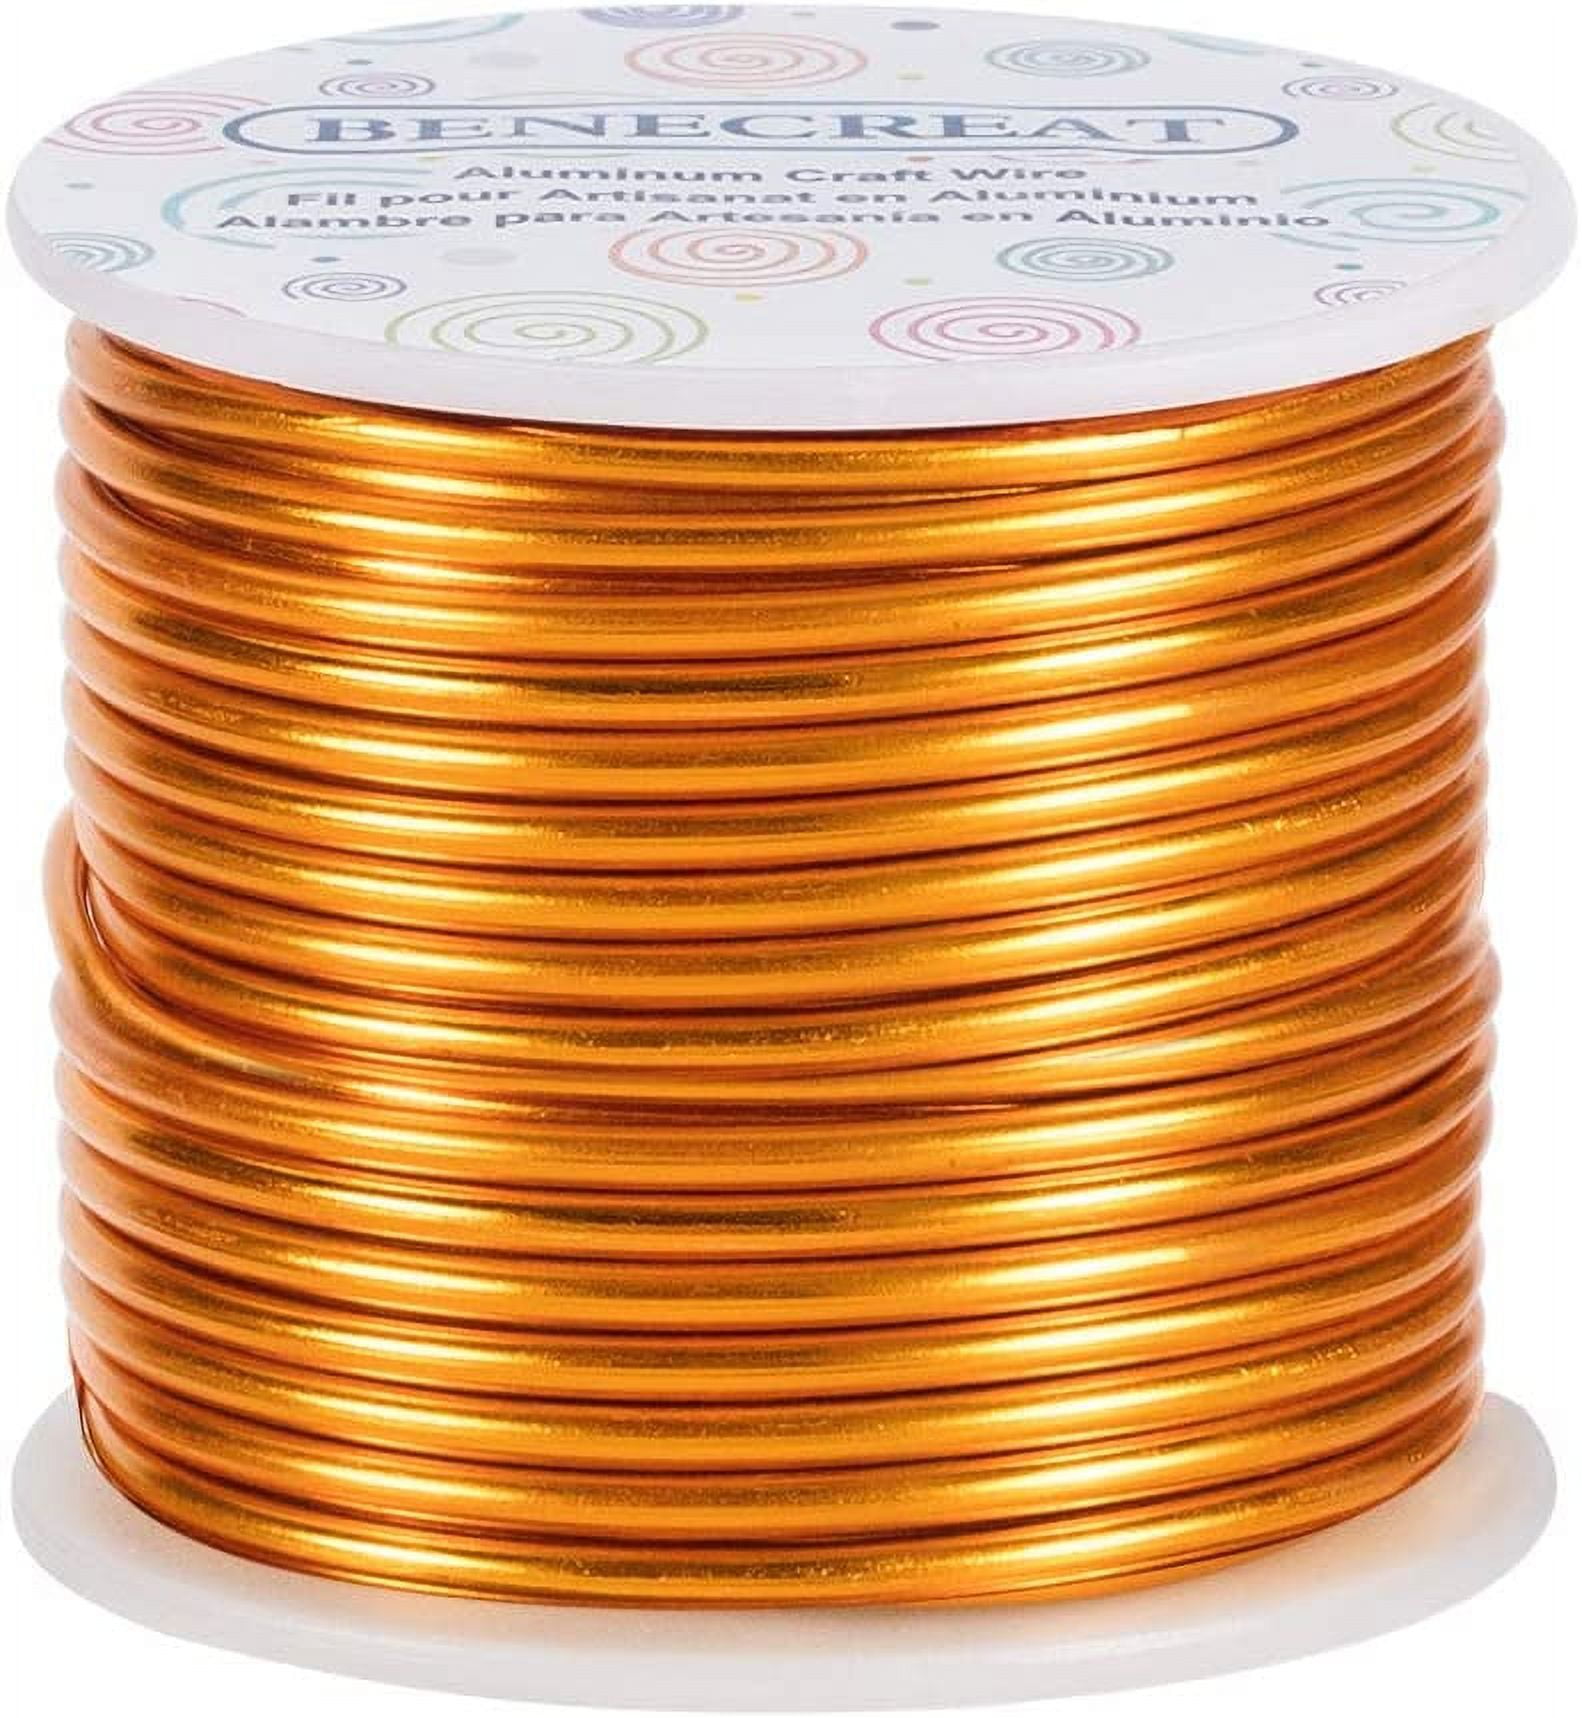 9 Gauge 55FT Gold Jewelry Craft Wire Tarnish Resistant Bendable Aluminum  Sculpting Metal Wire for Jewelry Craft Beading Work 3mm 